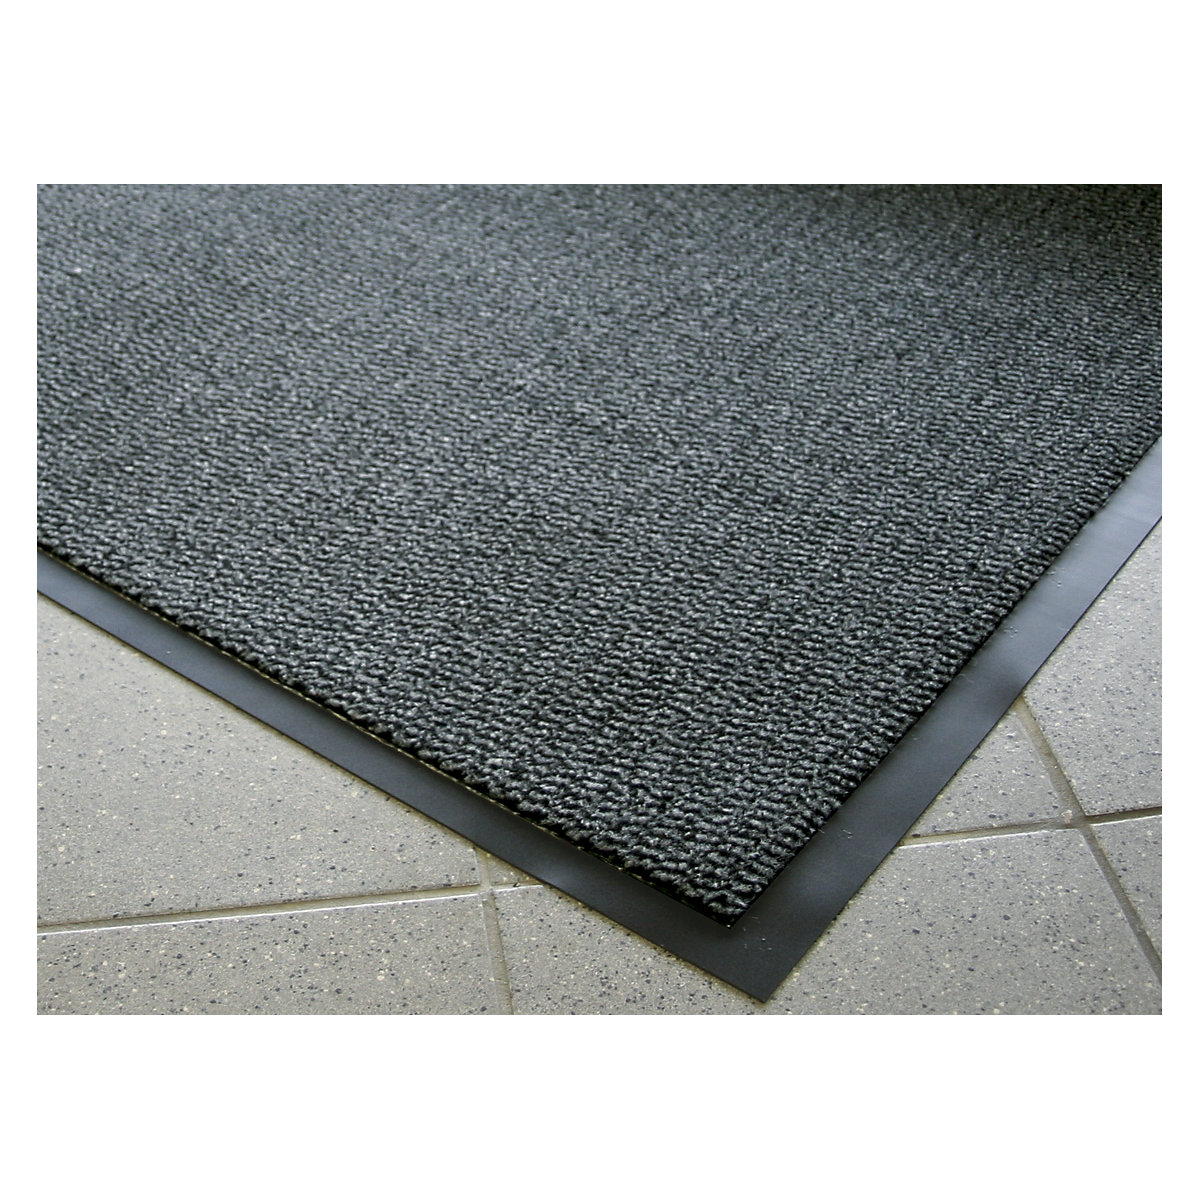 Entrance matting for indoor use, polypropylene pile, width 1200 mm, sold by the metre, black / metallic